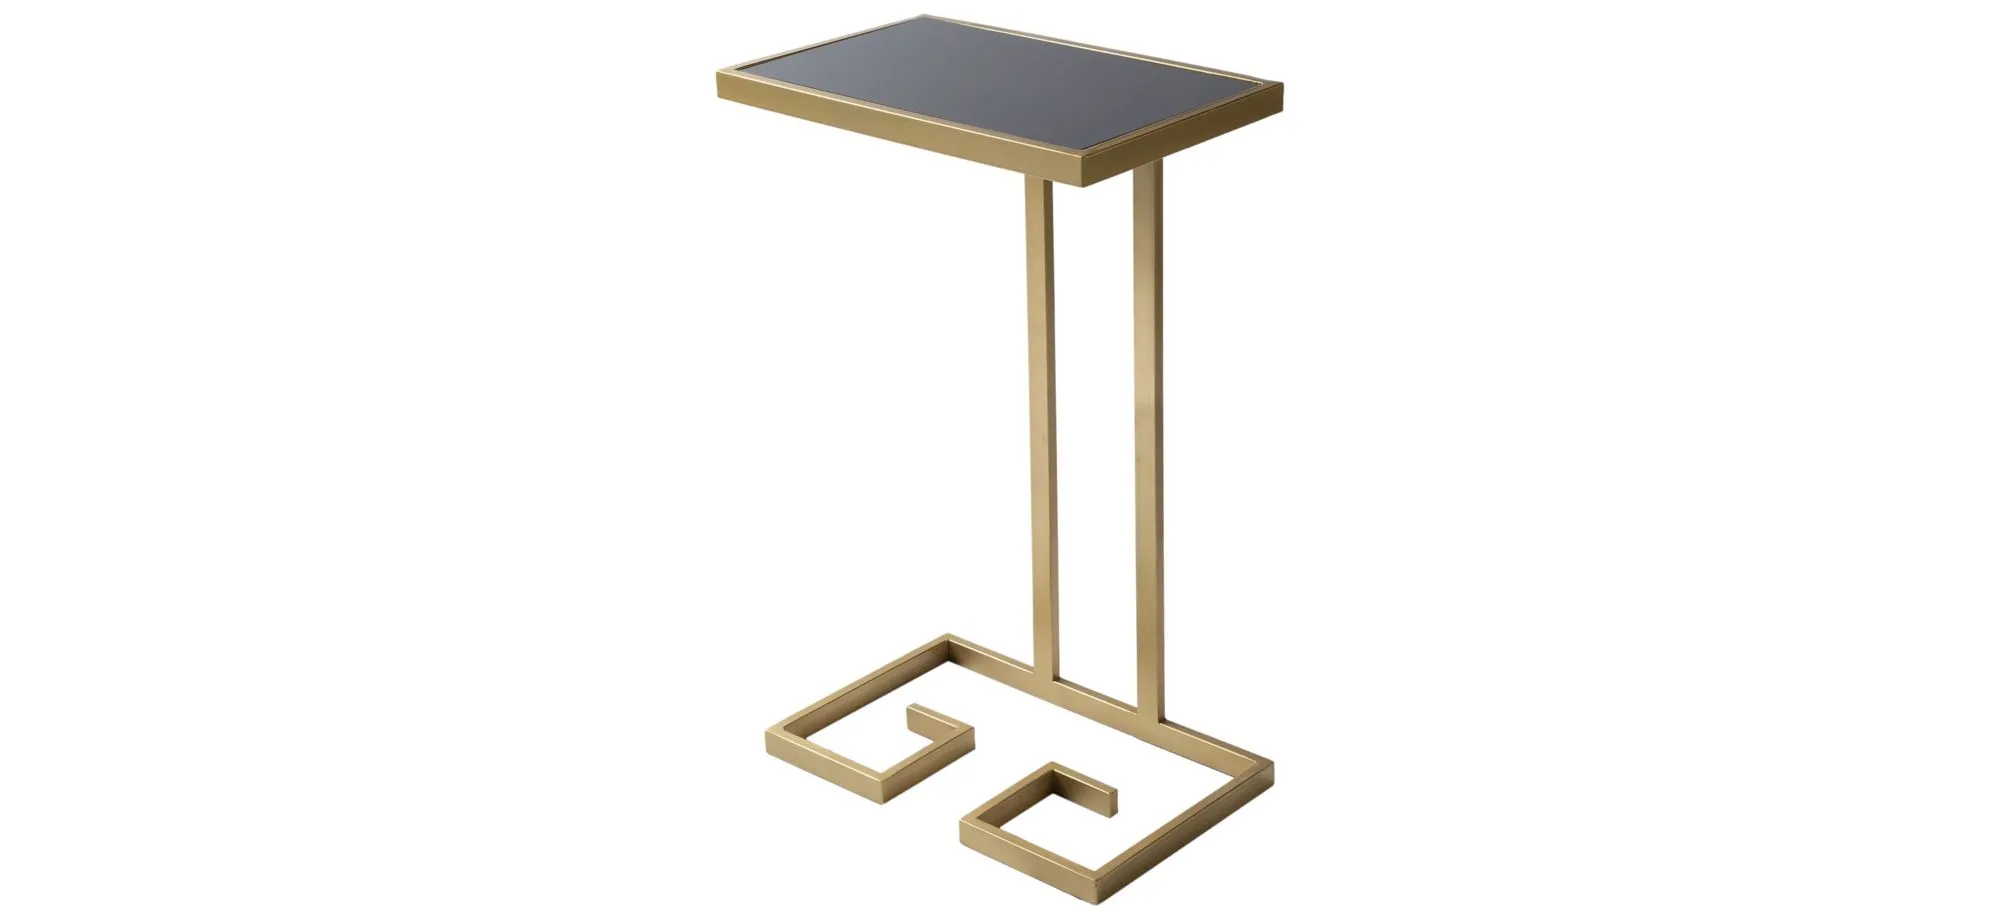 Parisian Rectangular End Table in Gold, Black by Surya